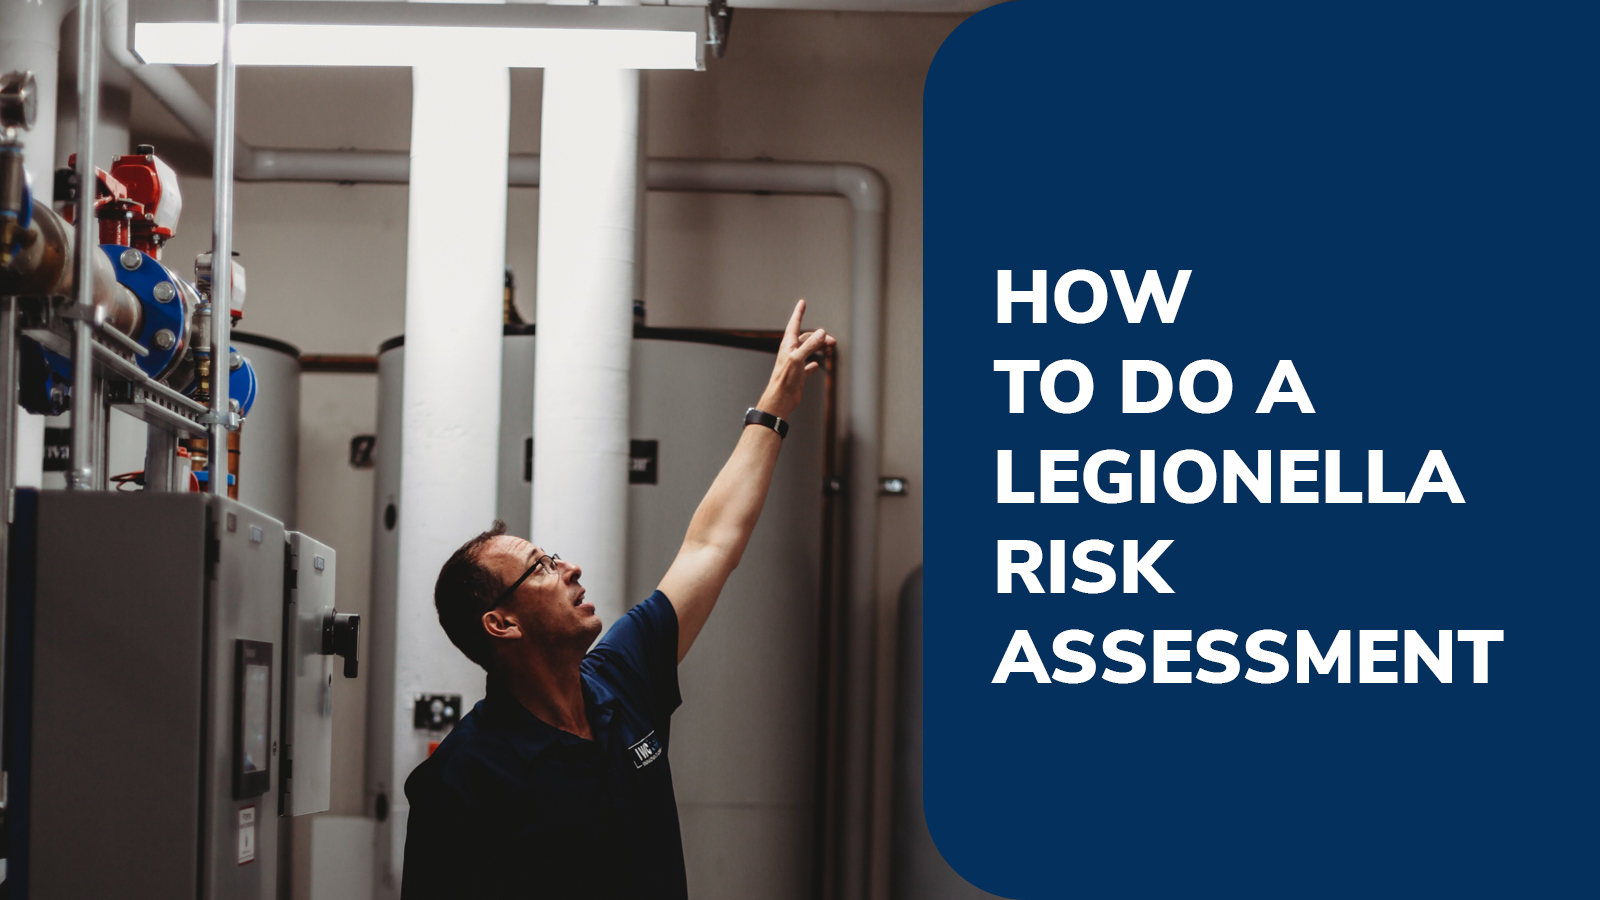 How To Do A Legionella Risk Assessment?